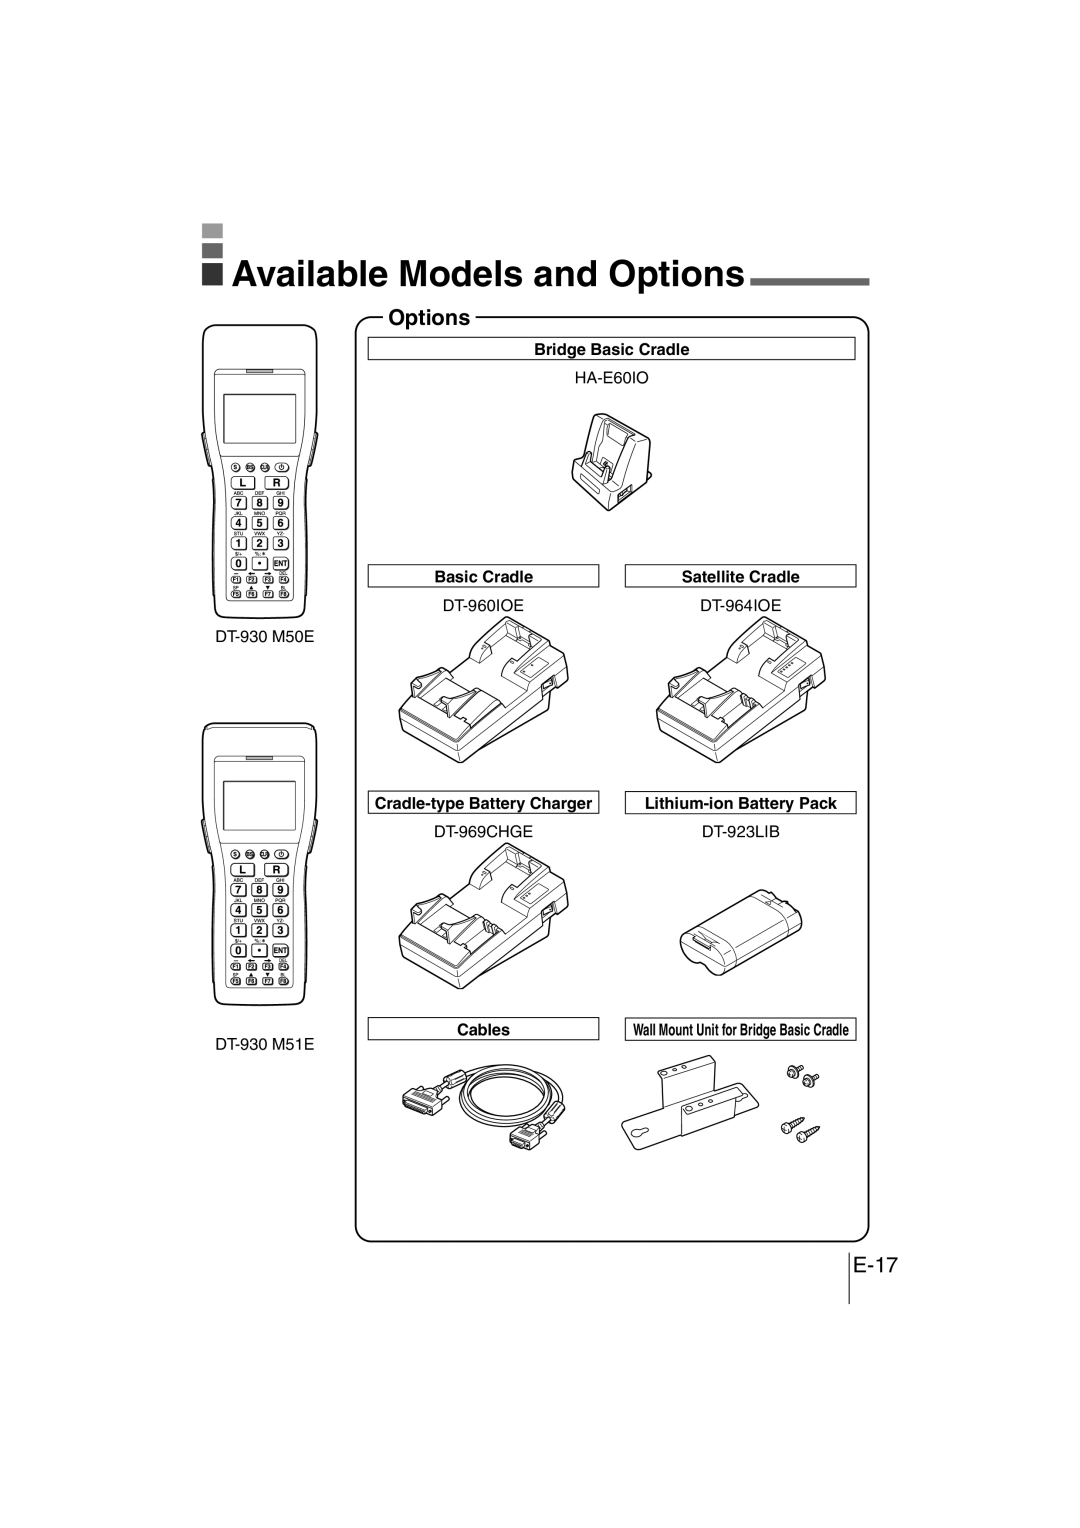 Casio DT-930 manual Available Models and Options, E-17, Wall Mount Unit for Bridge Basic Cradle 